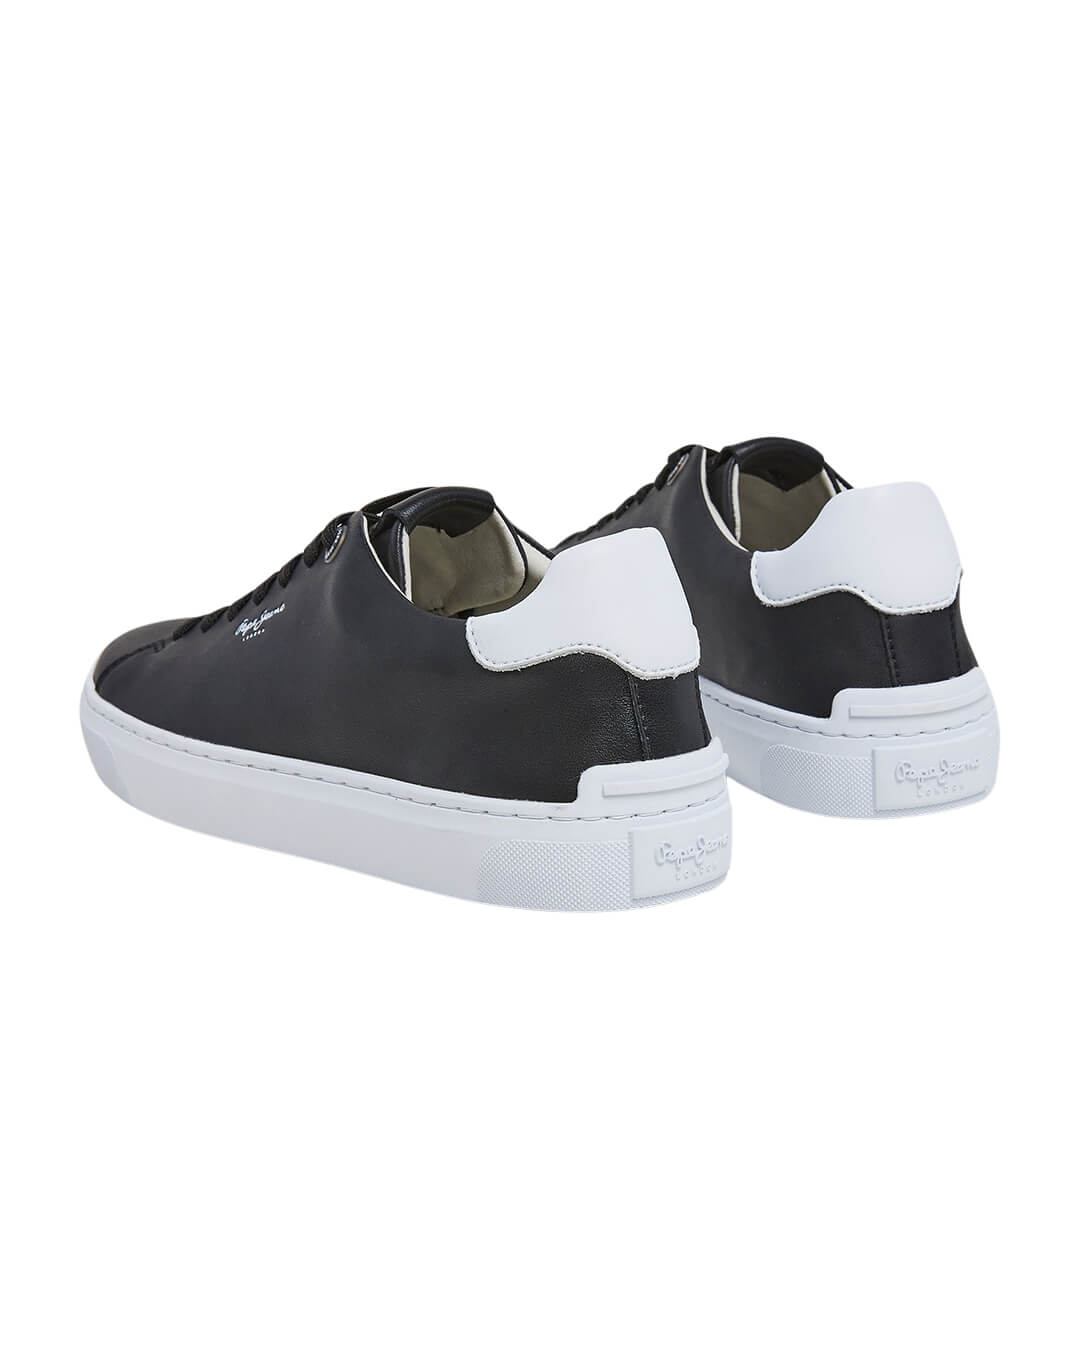 Pepe Jeans Shoes Pepe Jeans Black Camden Leather Sneakers